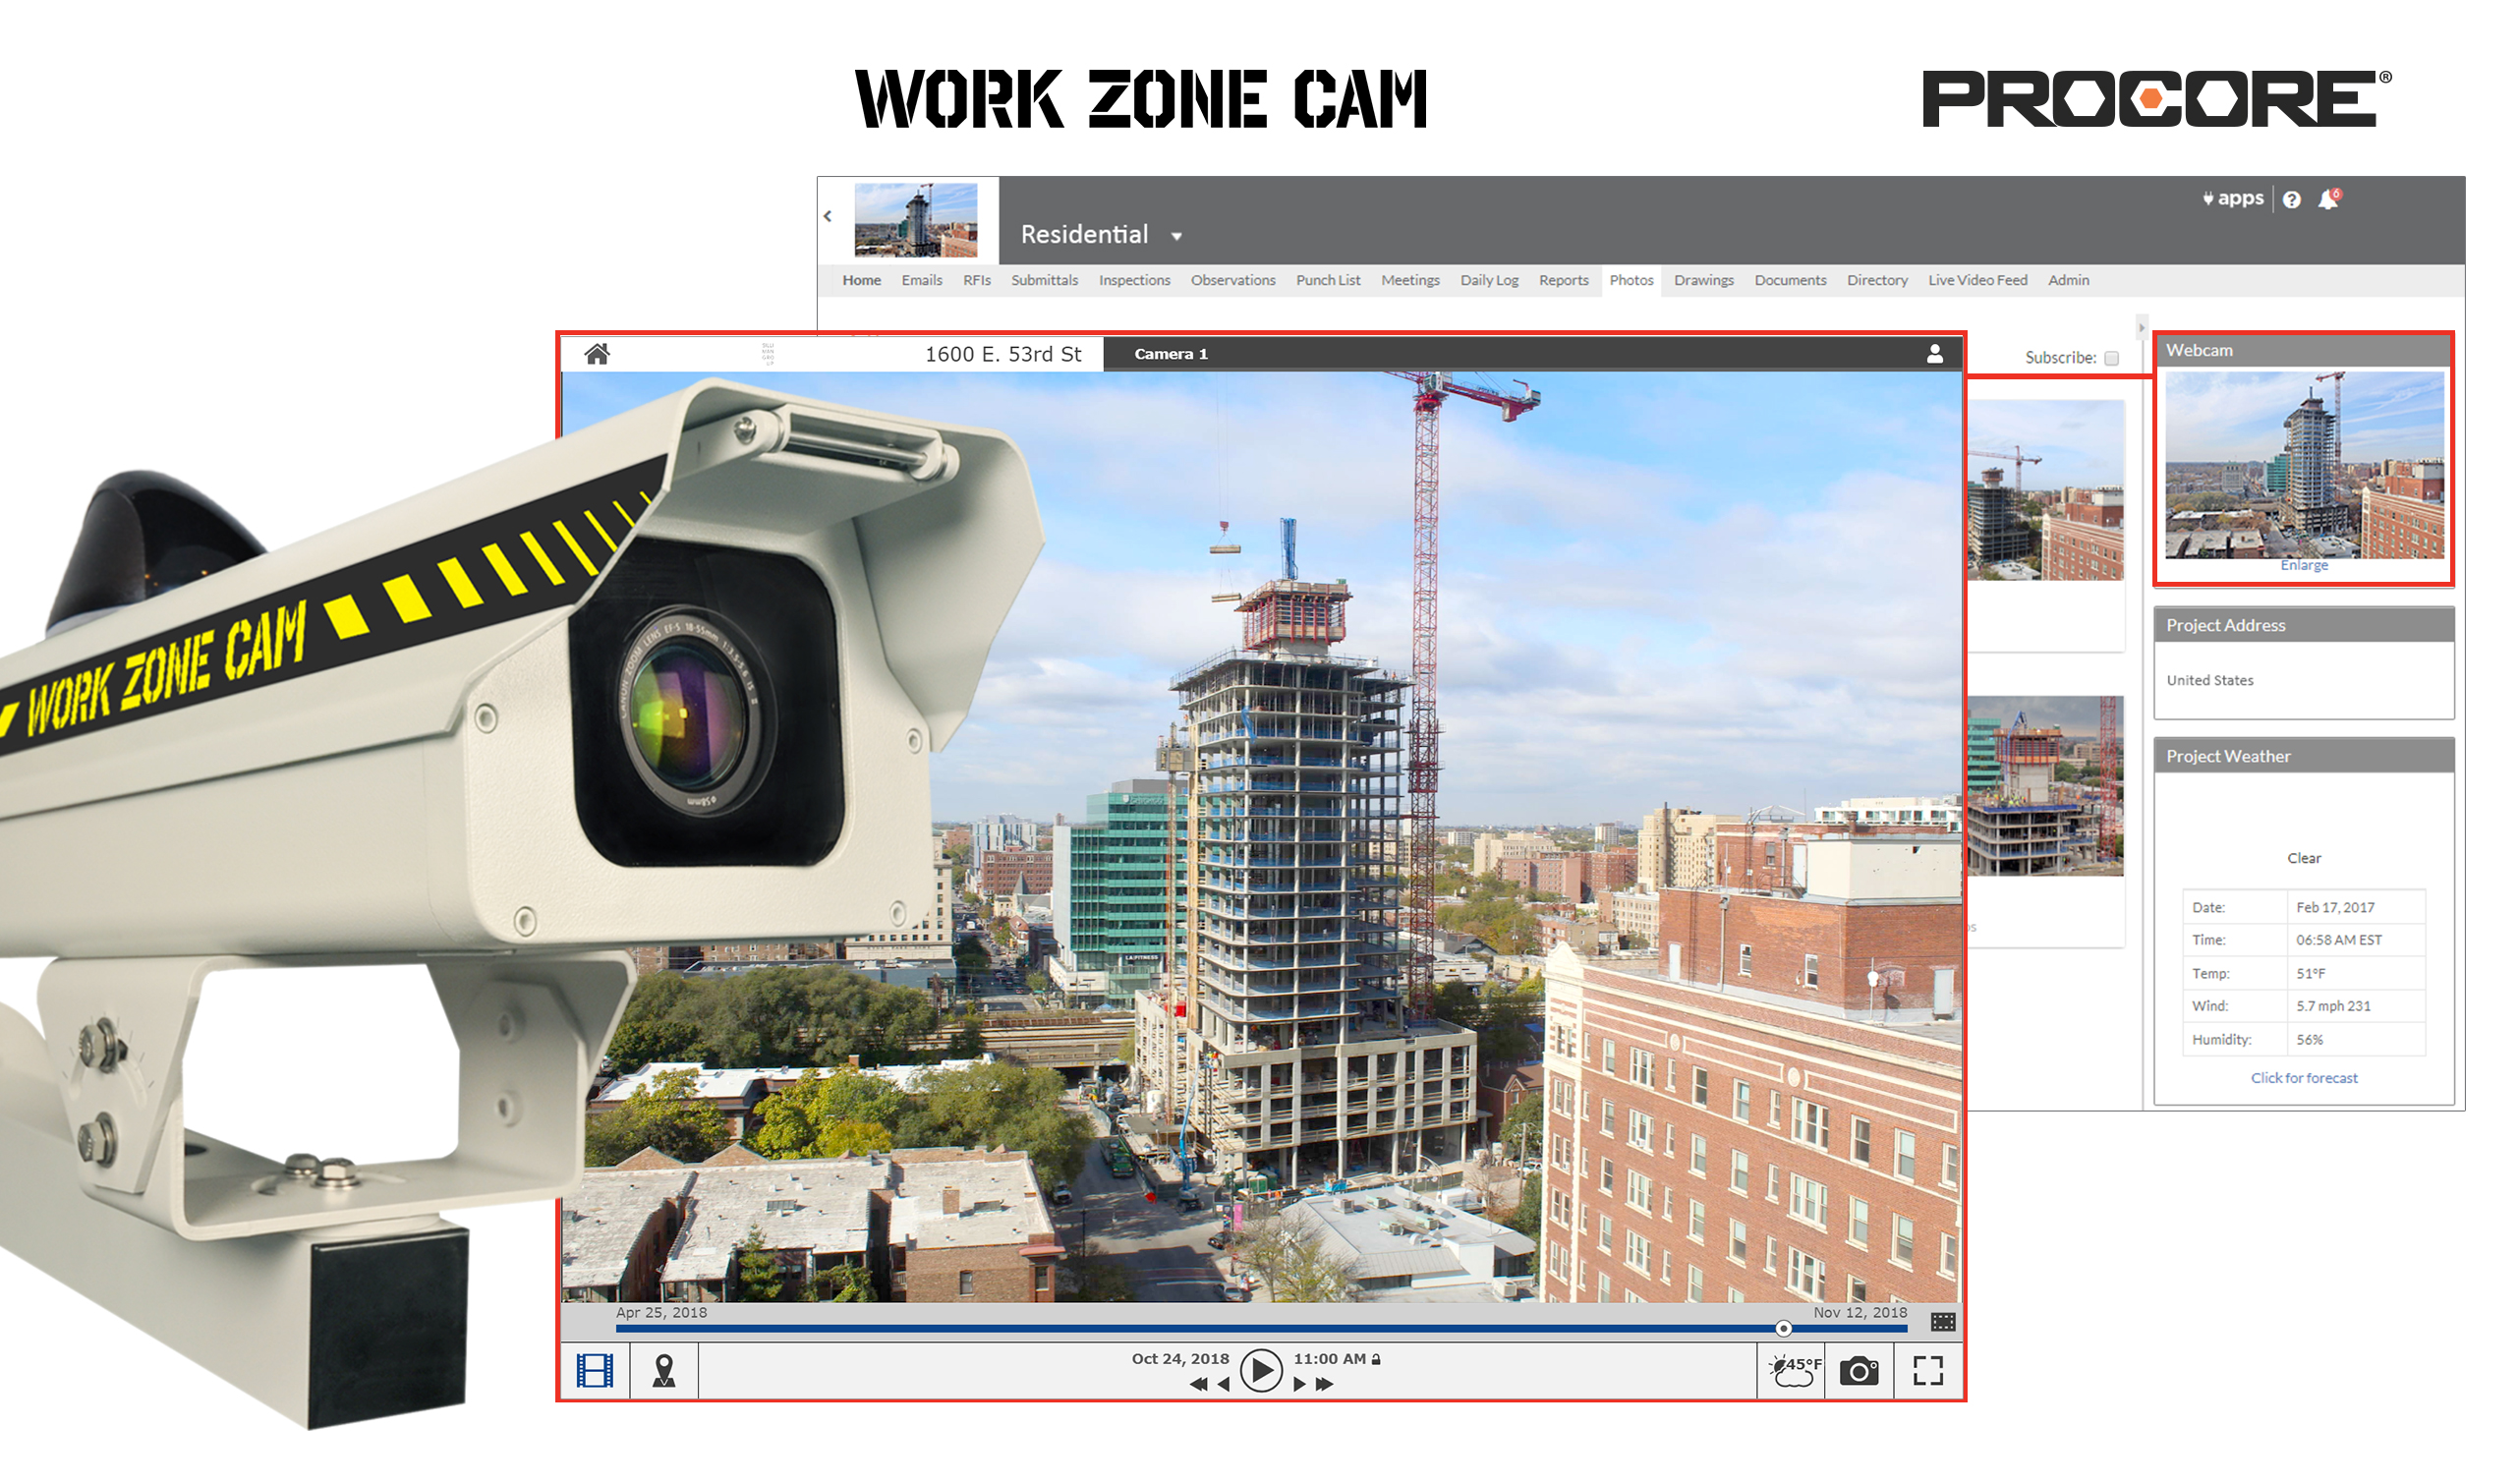 Procore users now have access to Work Zone Cam’s high-quality webcam technology, including highly-detailed 18 megapixel photography, to document important construction projects.